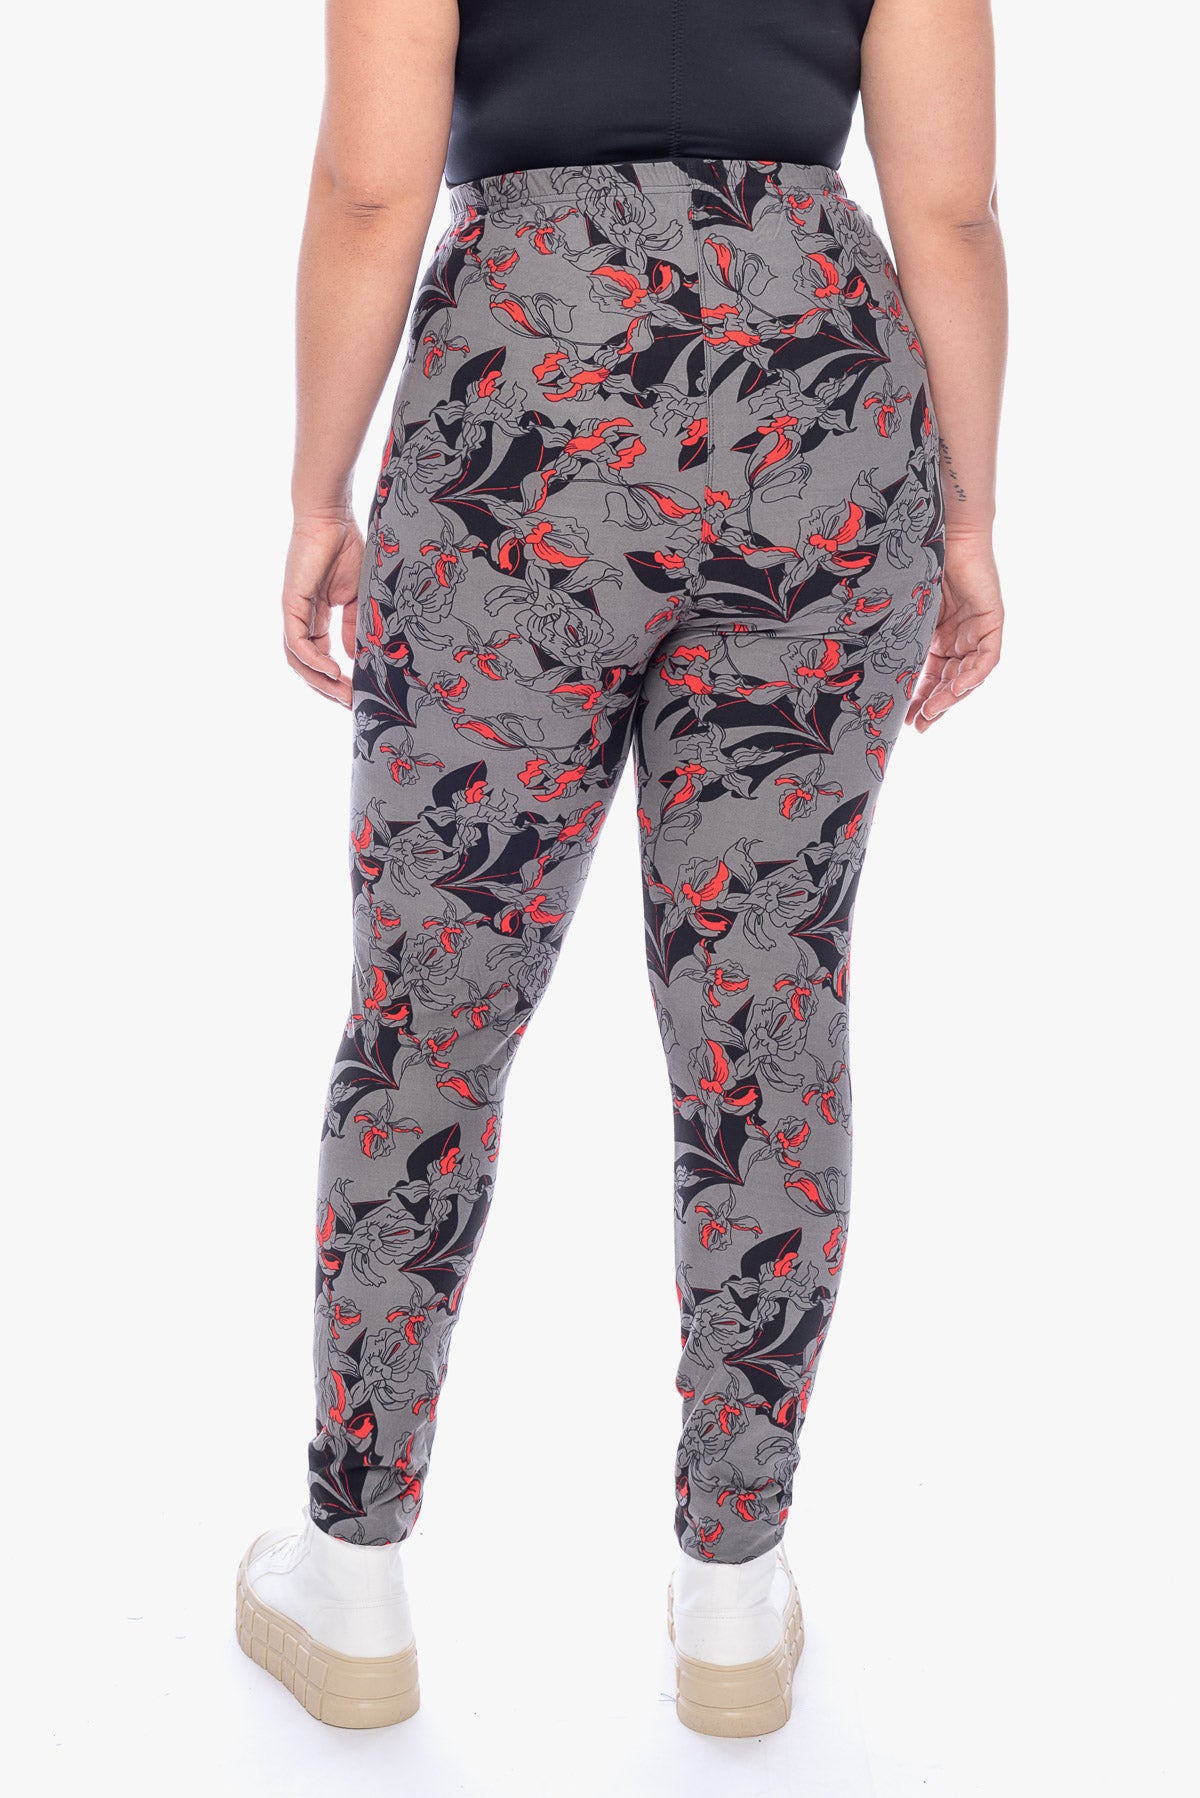 LILLY red flowers printed leggings